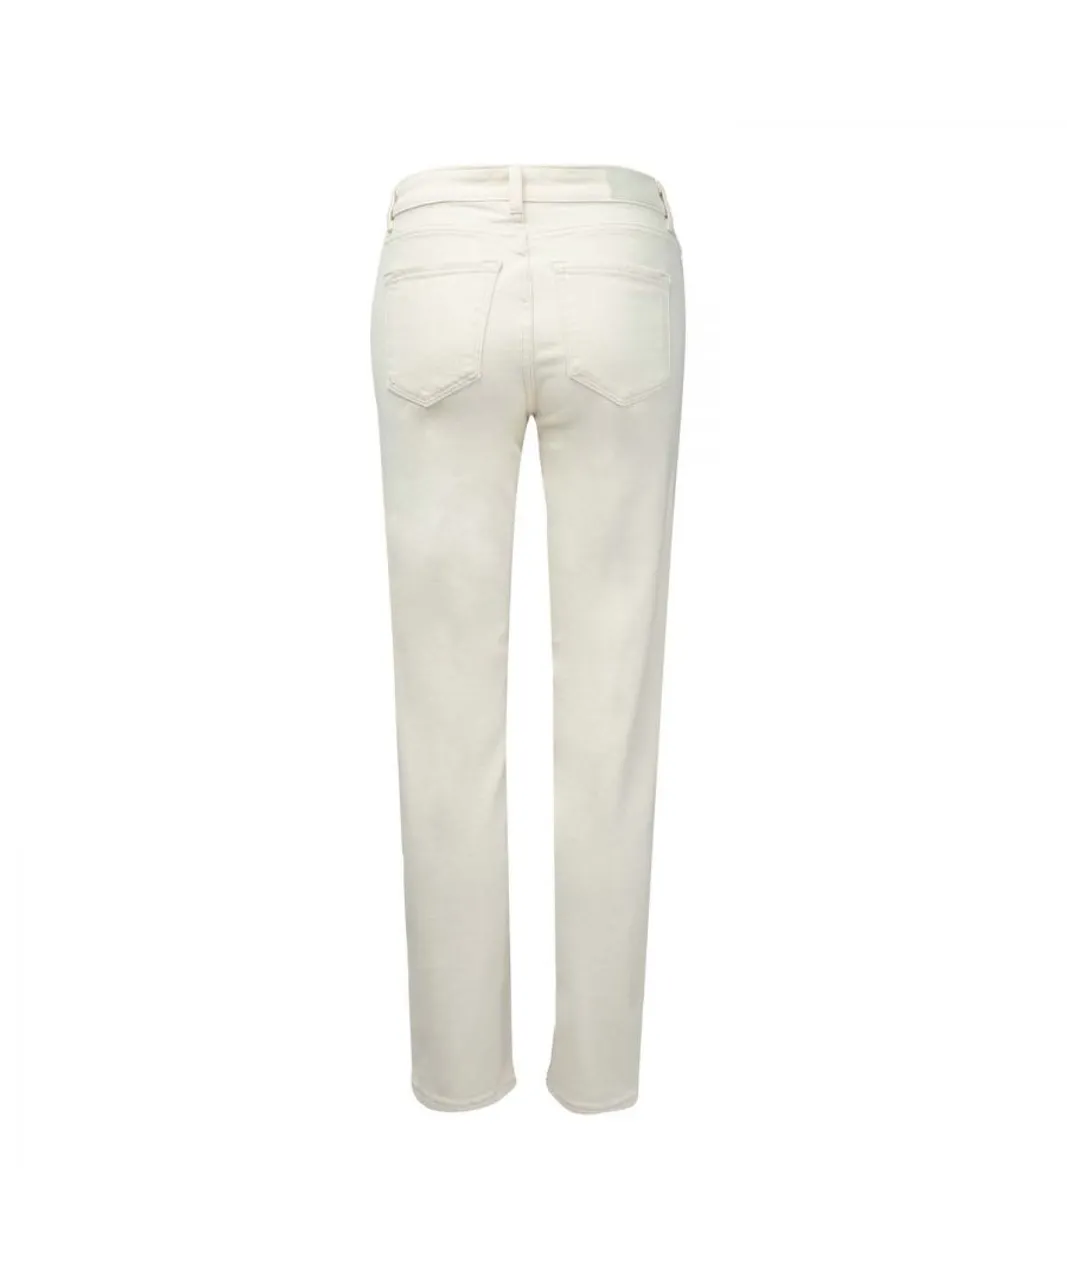 Only Womenss Emily Straight Fit High Waist Jeans in Ecru - Cream Cotton